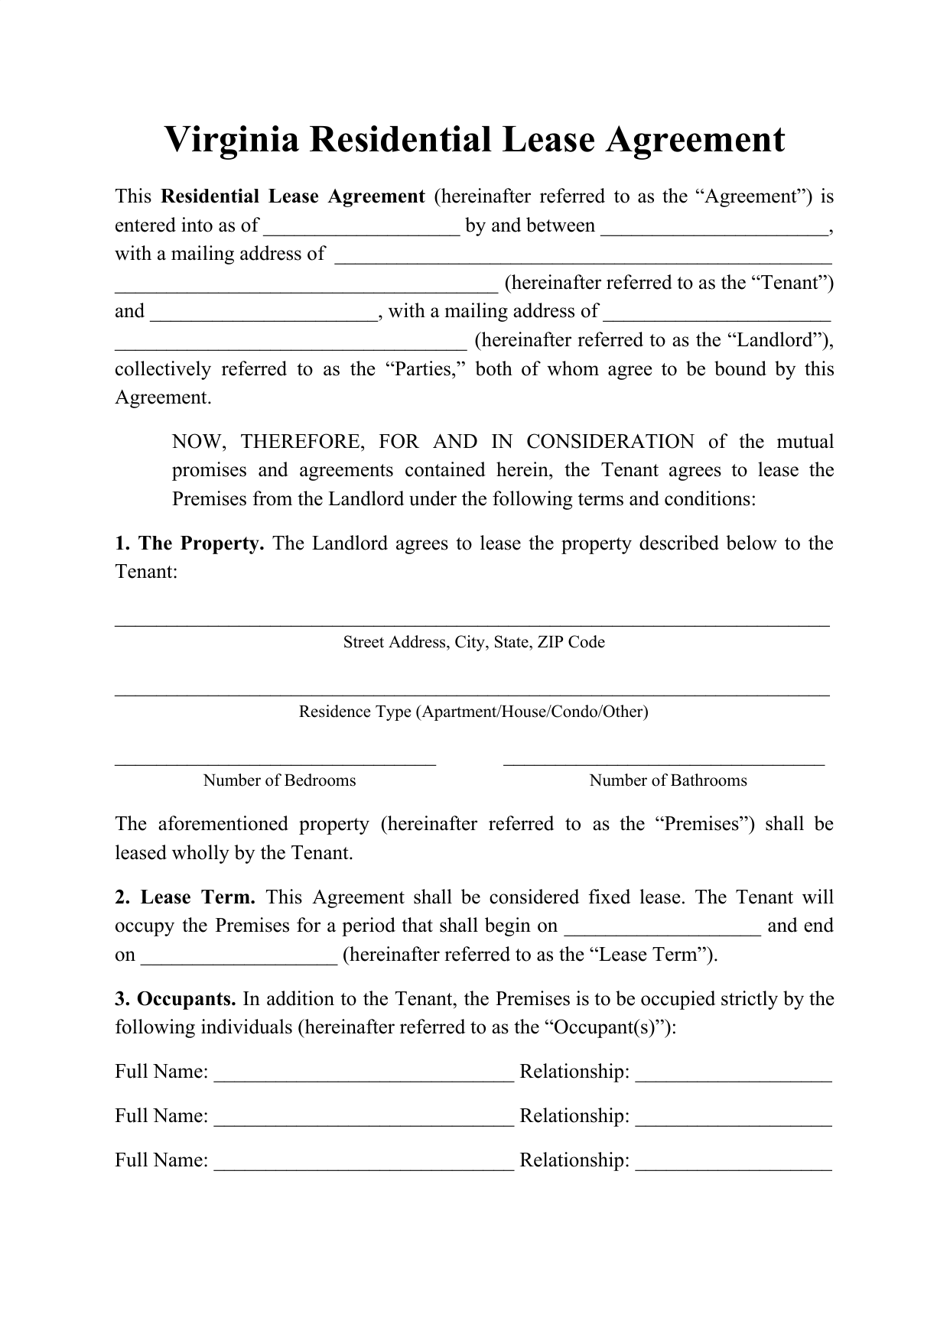 Virginia Residential Lease Agreement Template Fill Out Sign Online